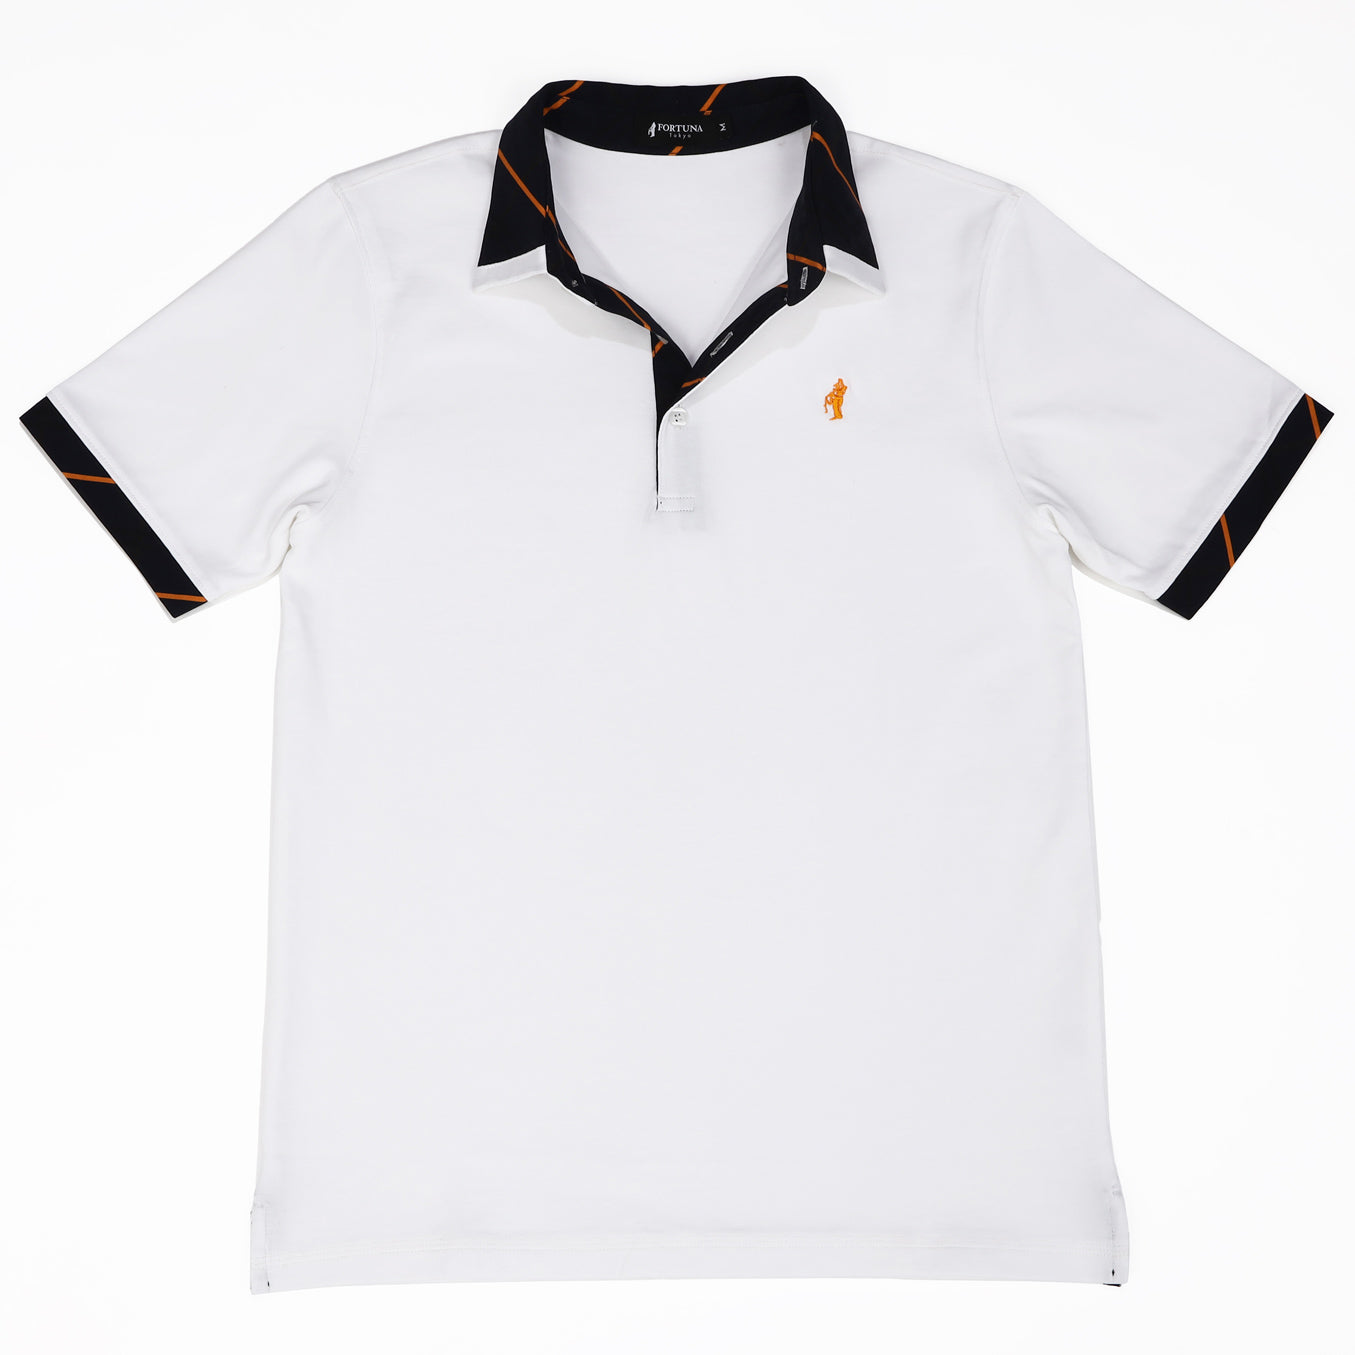 Polo shirt men's 05. Chance plaid with logo embroidery short sleeve FORTUNA Tokyo